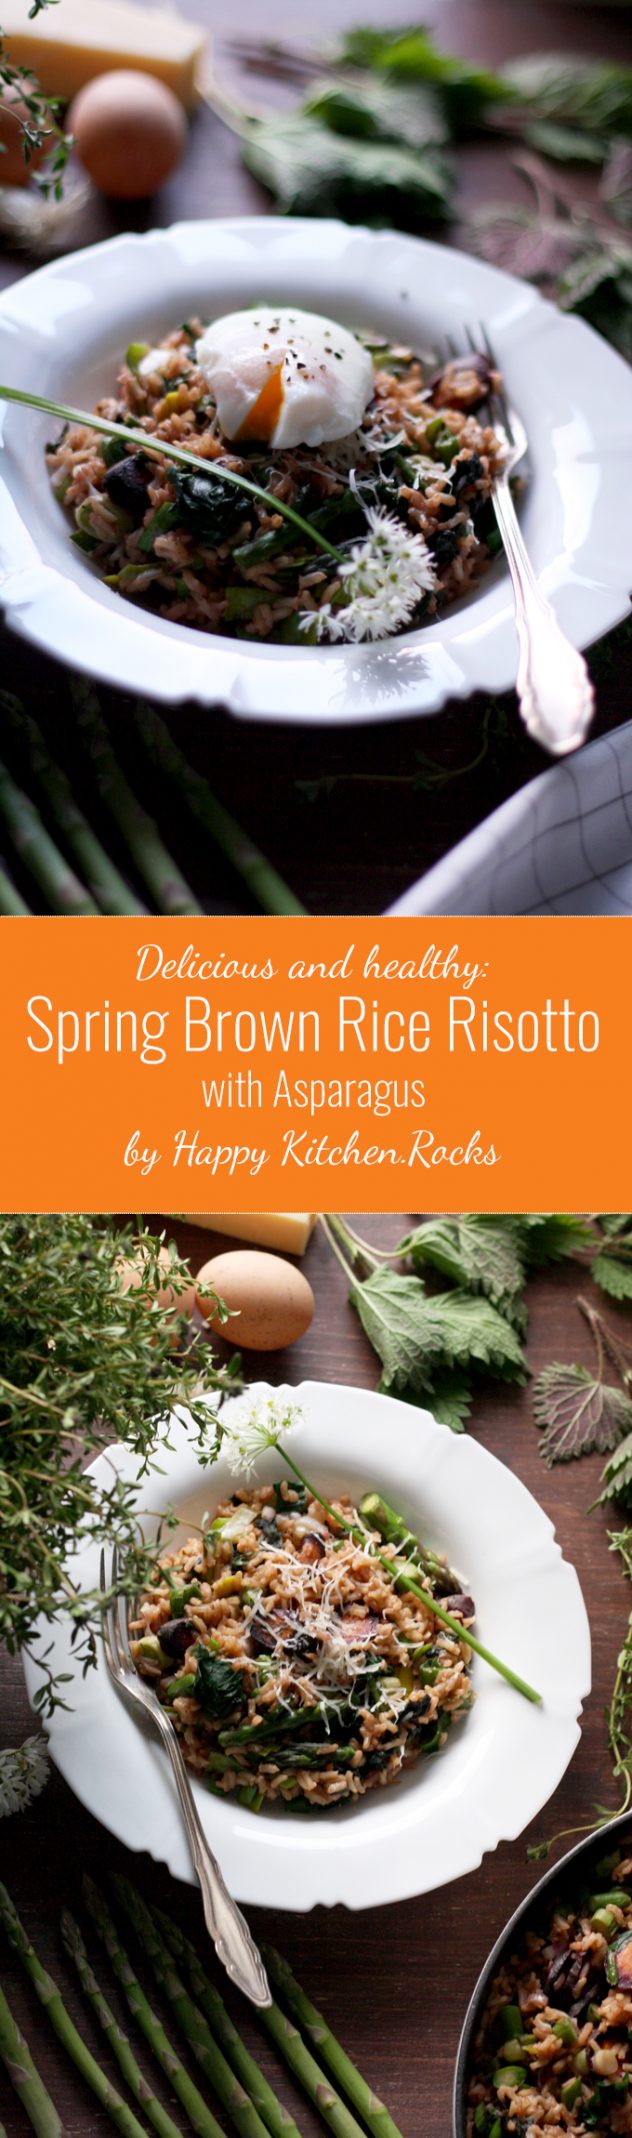 Delicious and easy spring brown rice risotto with spring greens, carrots and asparagus. Healthy gluten-free dinner packed with spring flavors!